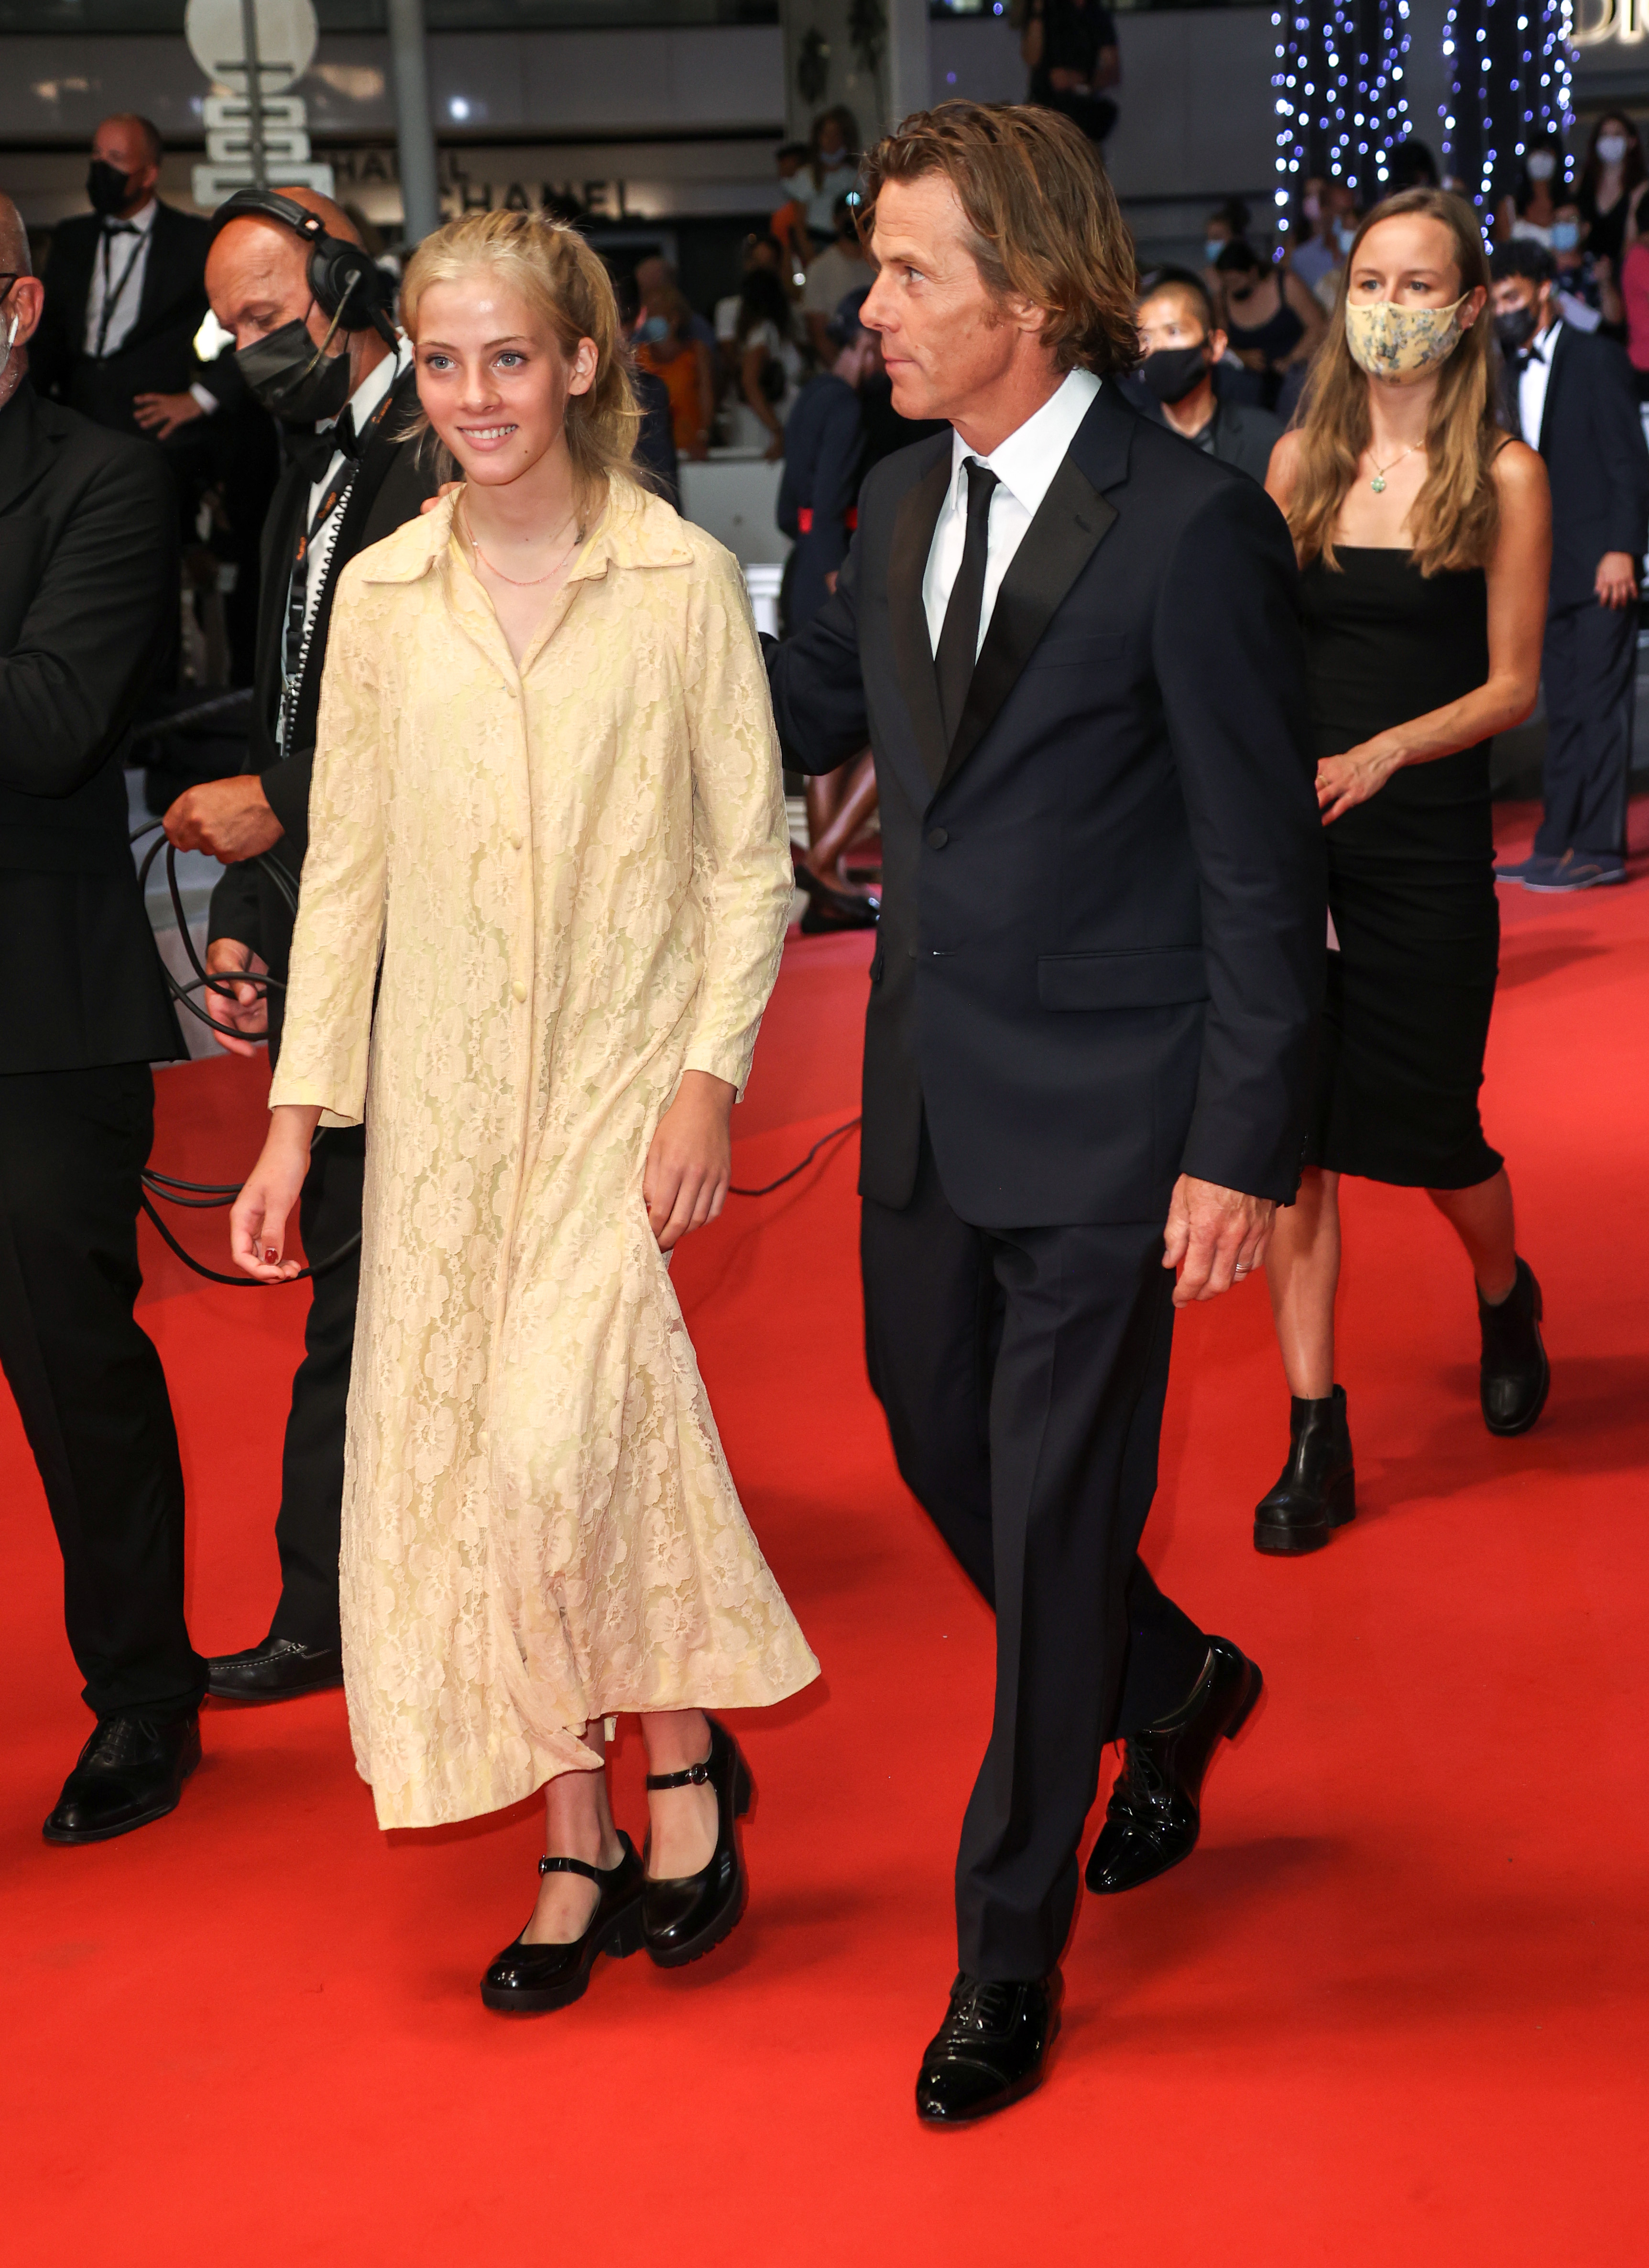 Hazel and Danny Moder at the 74th Annual Cannes Film Festival on July 10, 2021 | Source: Getty Images